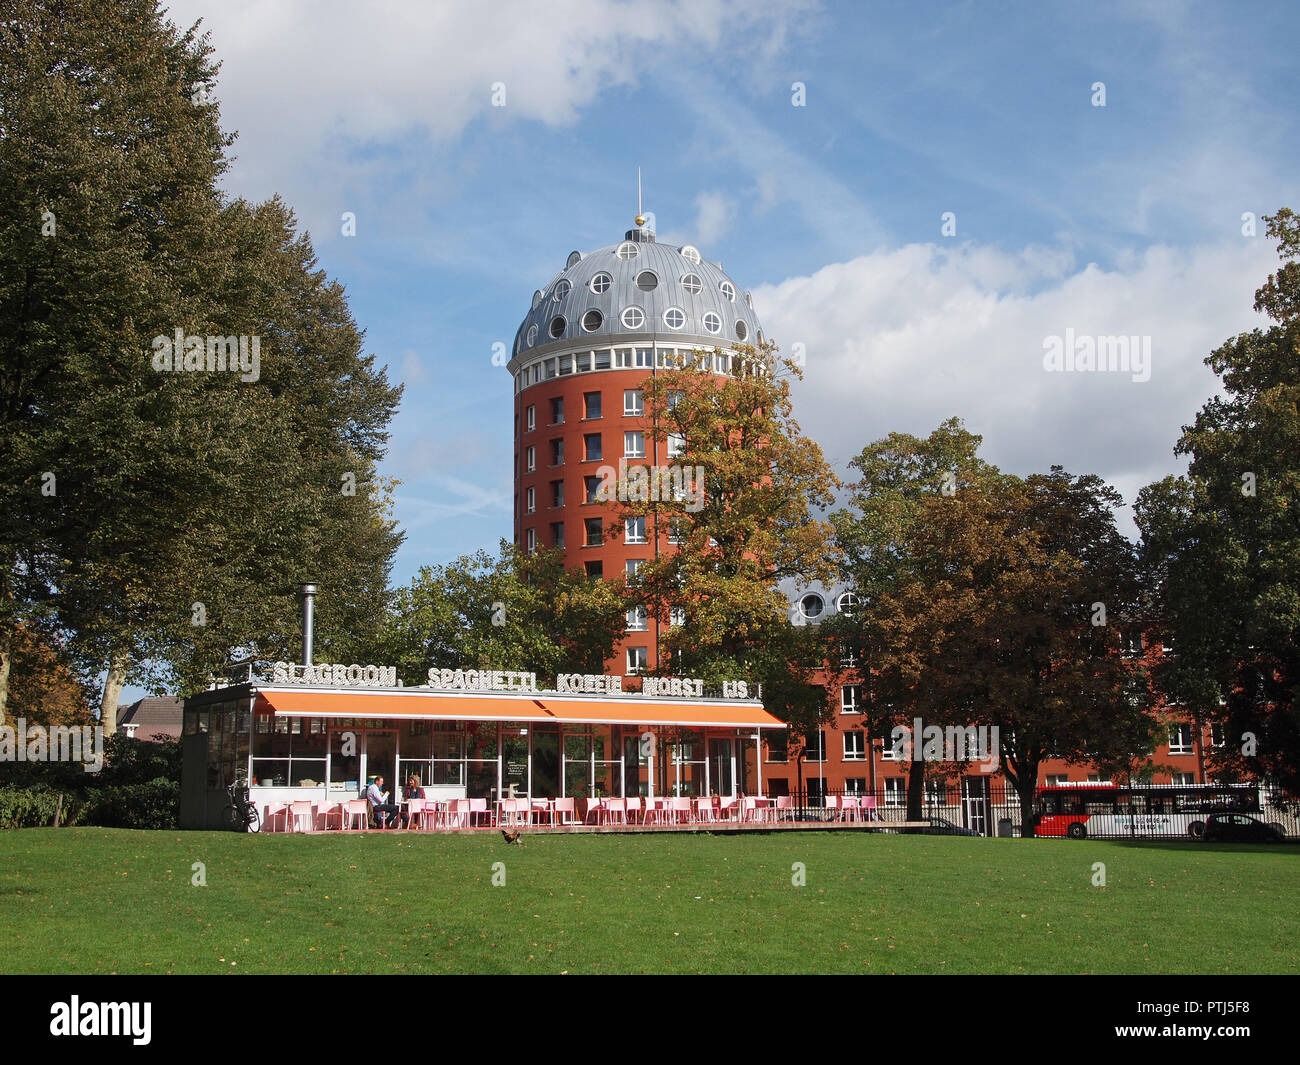 The T-huis pavillion in the Valkenberg park in the city centre of Breda, the Netherlands. It was designed by artist John Kormeling in 1995. Stock Photo